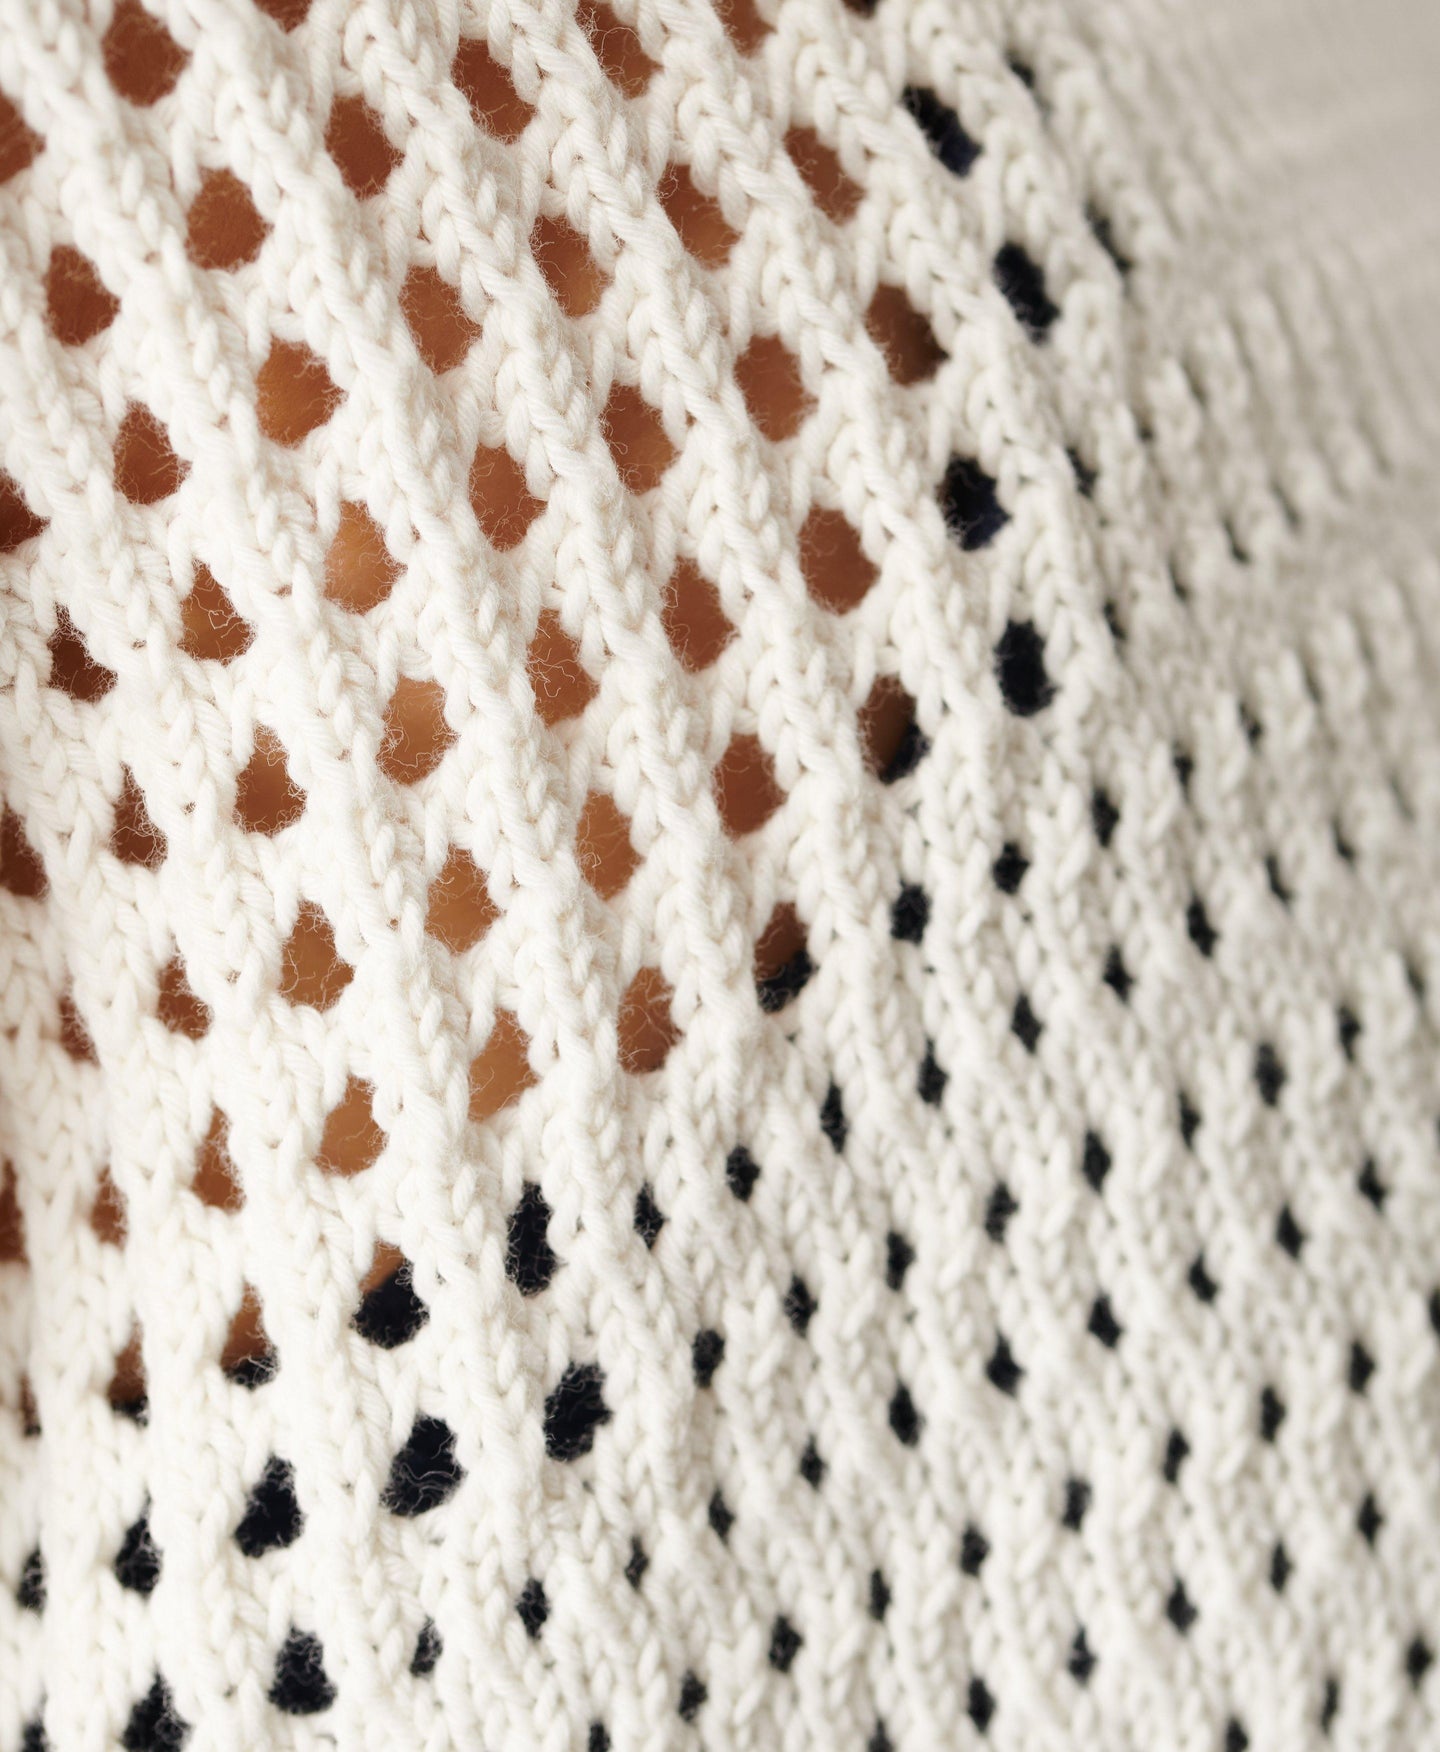 Tides High Open Weave Jumper Sb6320 Lily-White